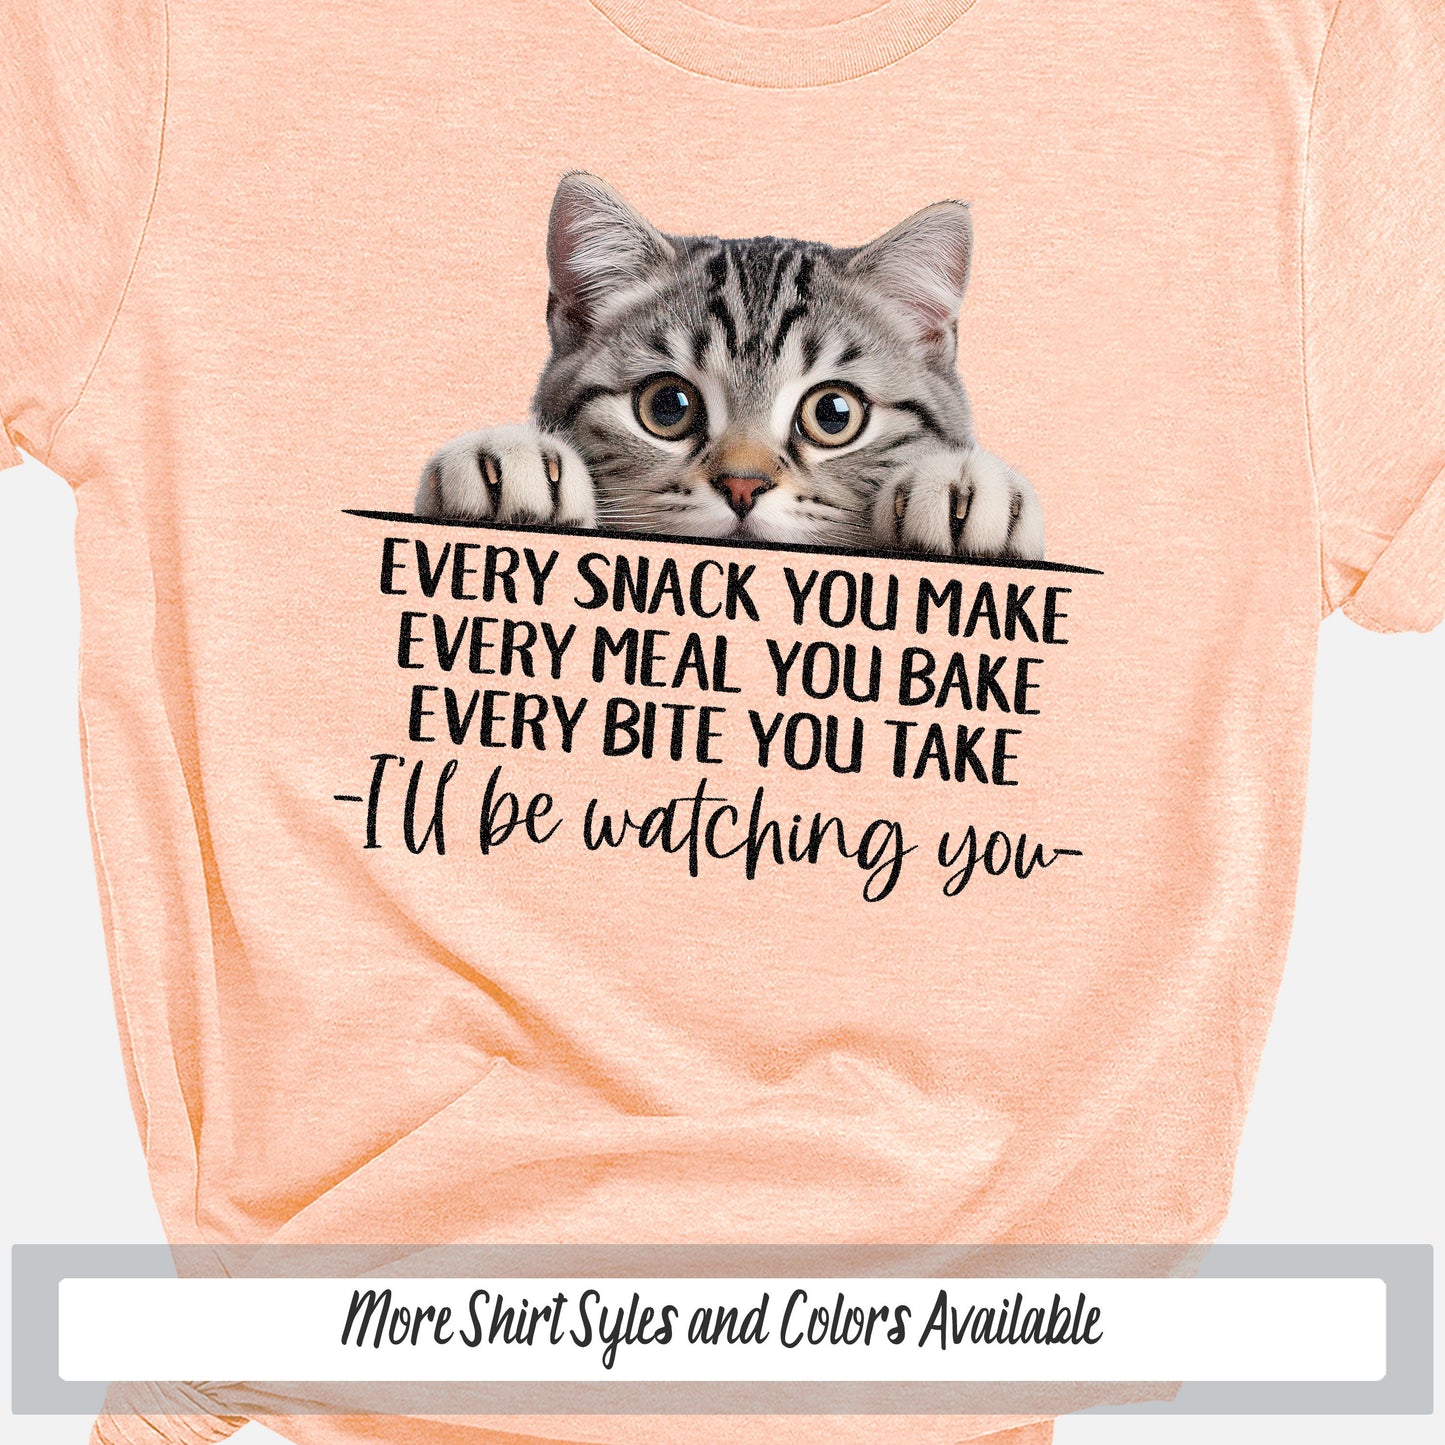 American Shorthair Funny Cat Mom Shirt, Every Snack You Make Cat Shirt, Funny Saying Shirt Cat Gift for Cat Lover, Crazy Cat Lady Sweatshirt